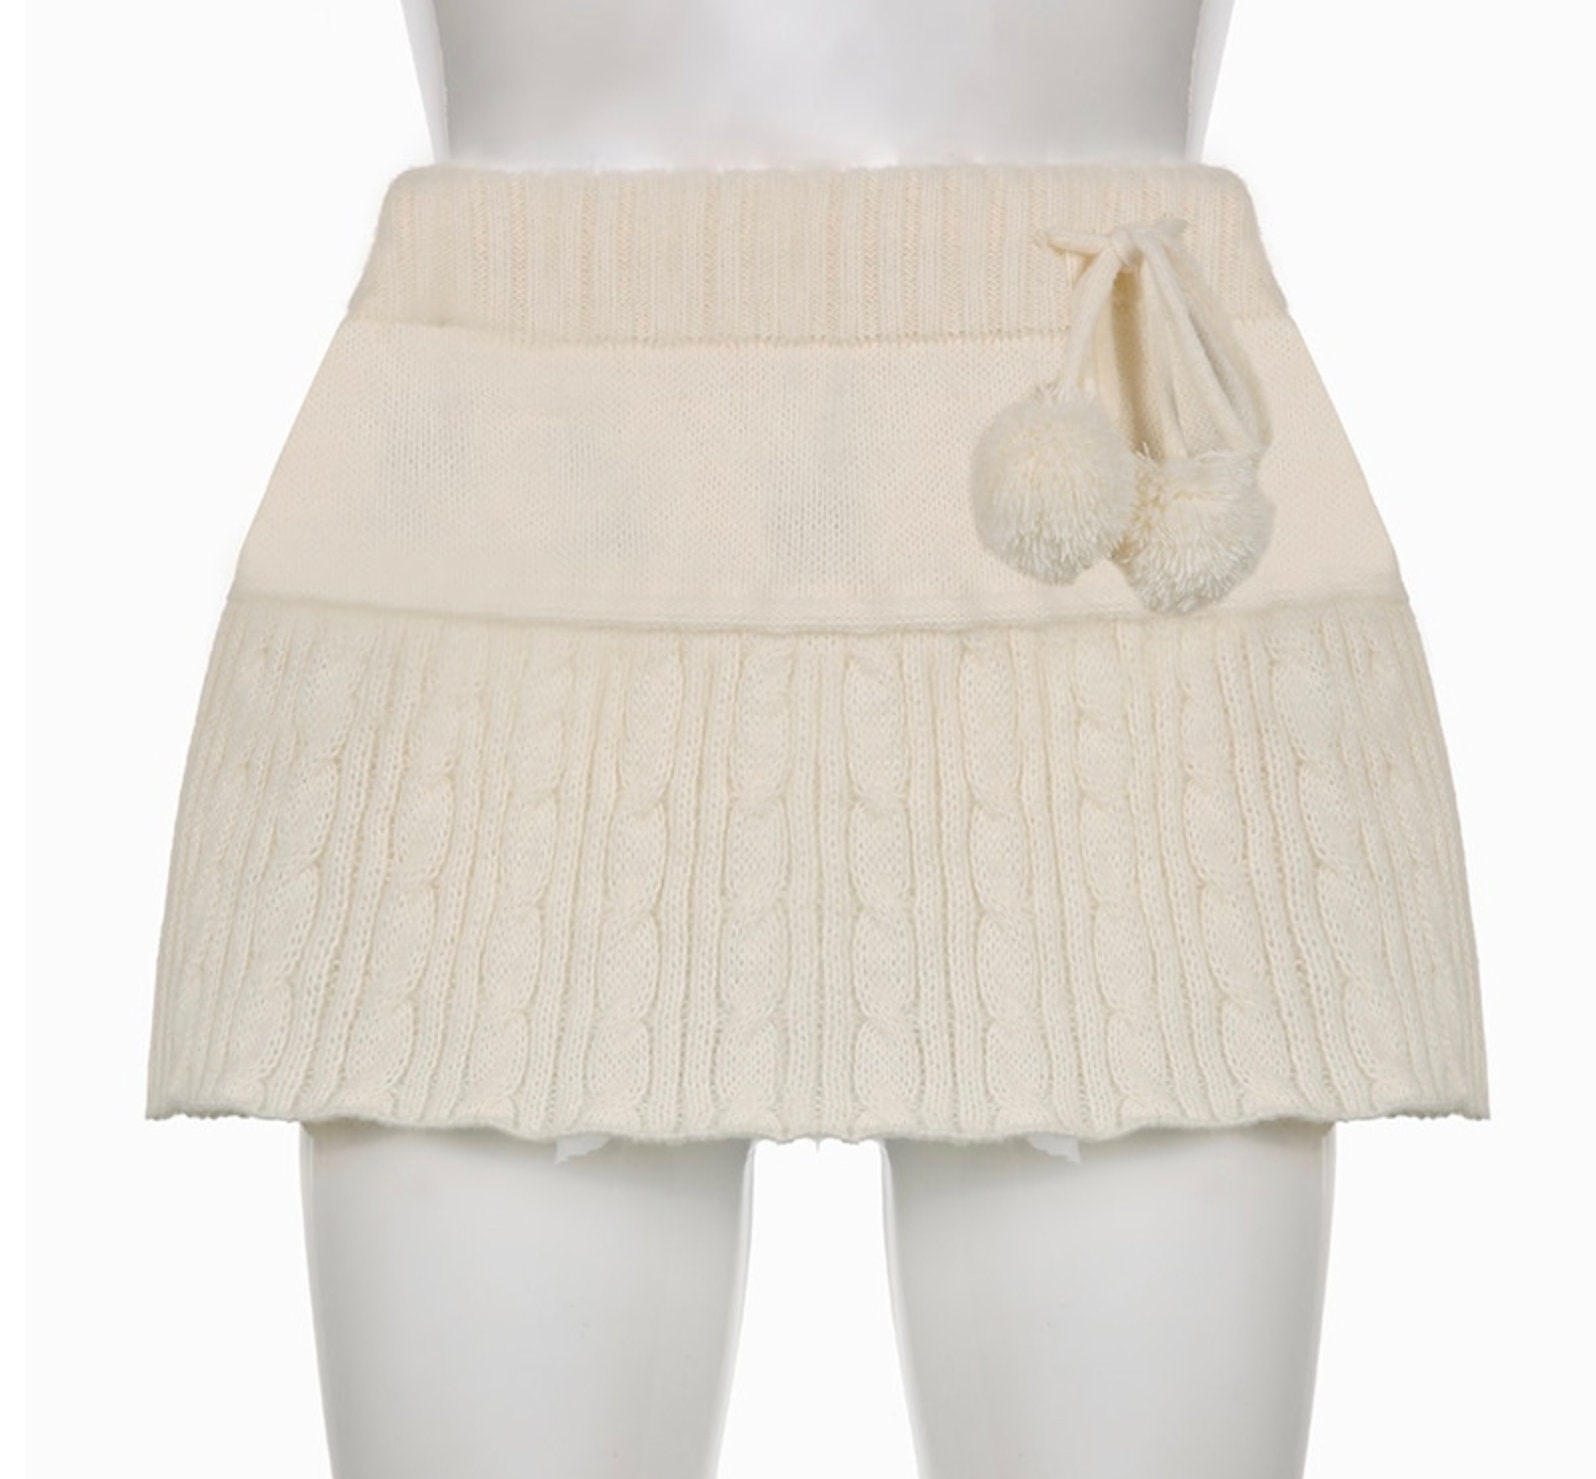 Y2k Knitted Mini Skirt Cream or Grey Grunge Early 2000s - Etsy UK